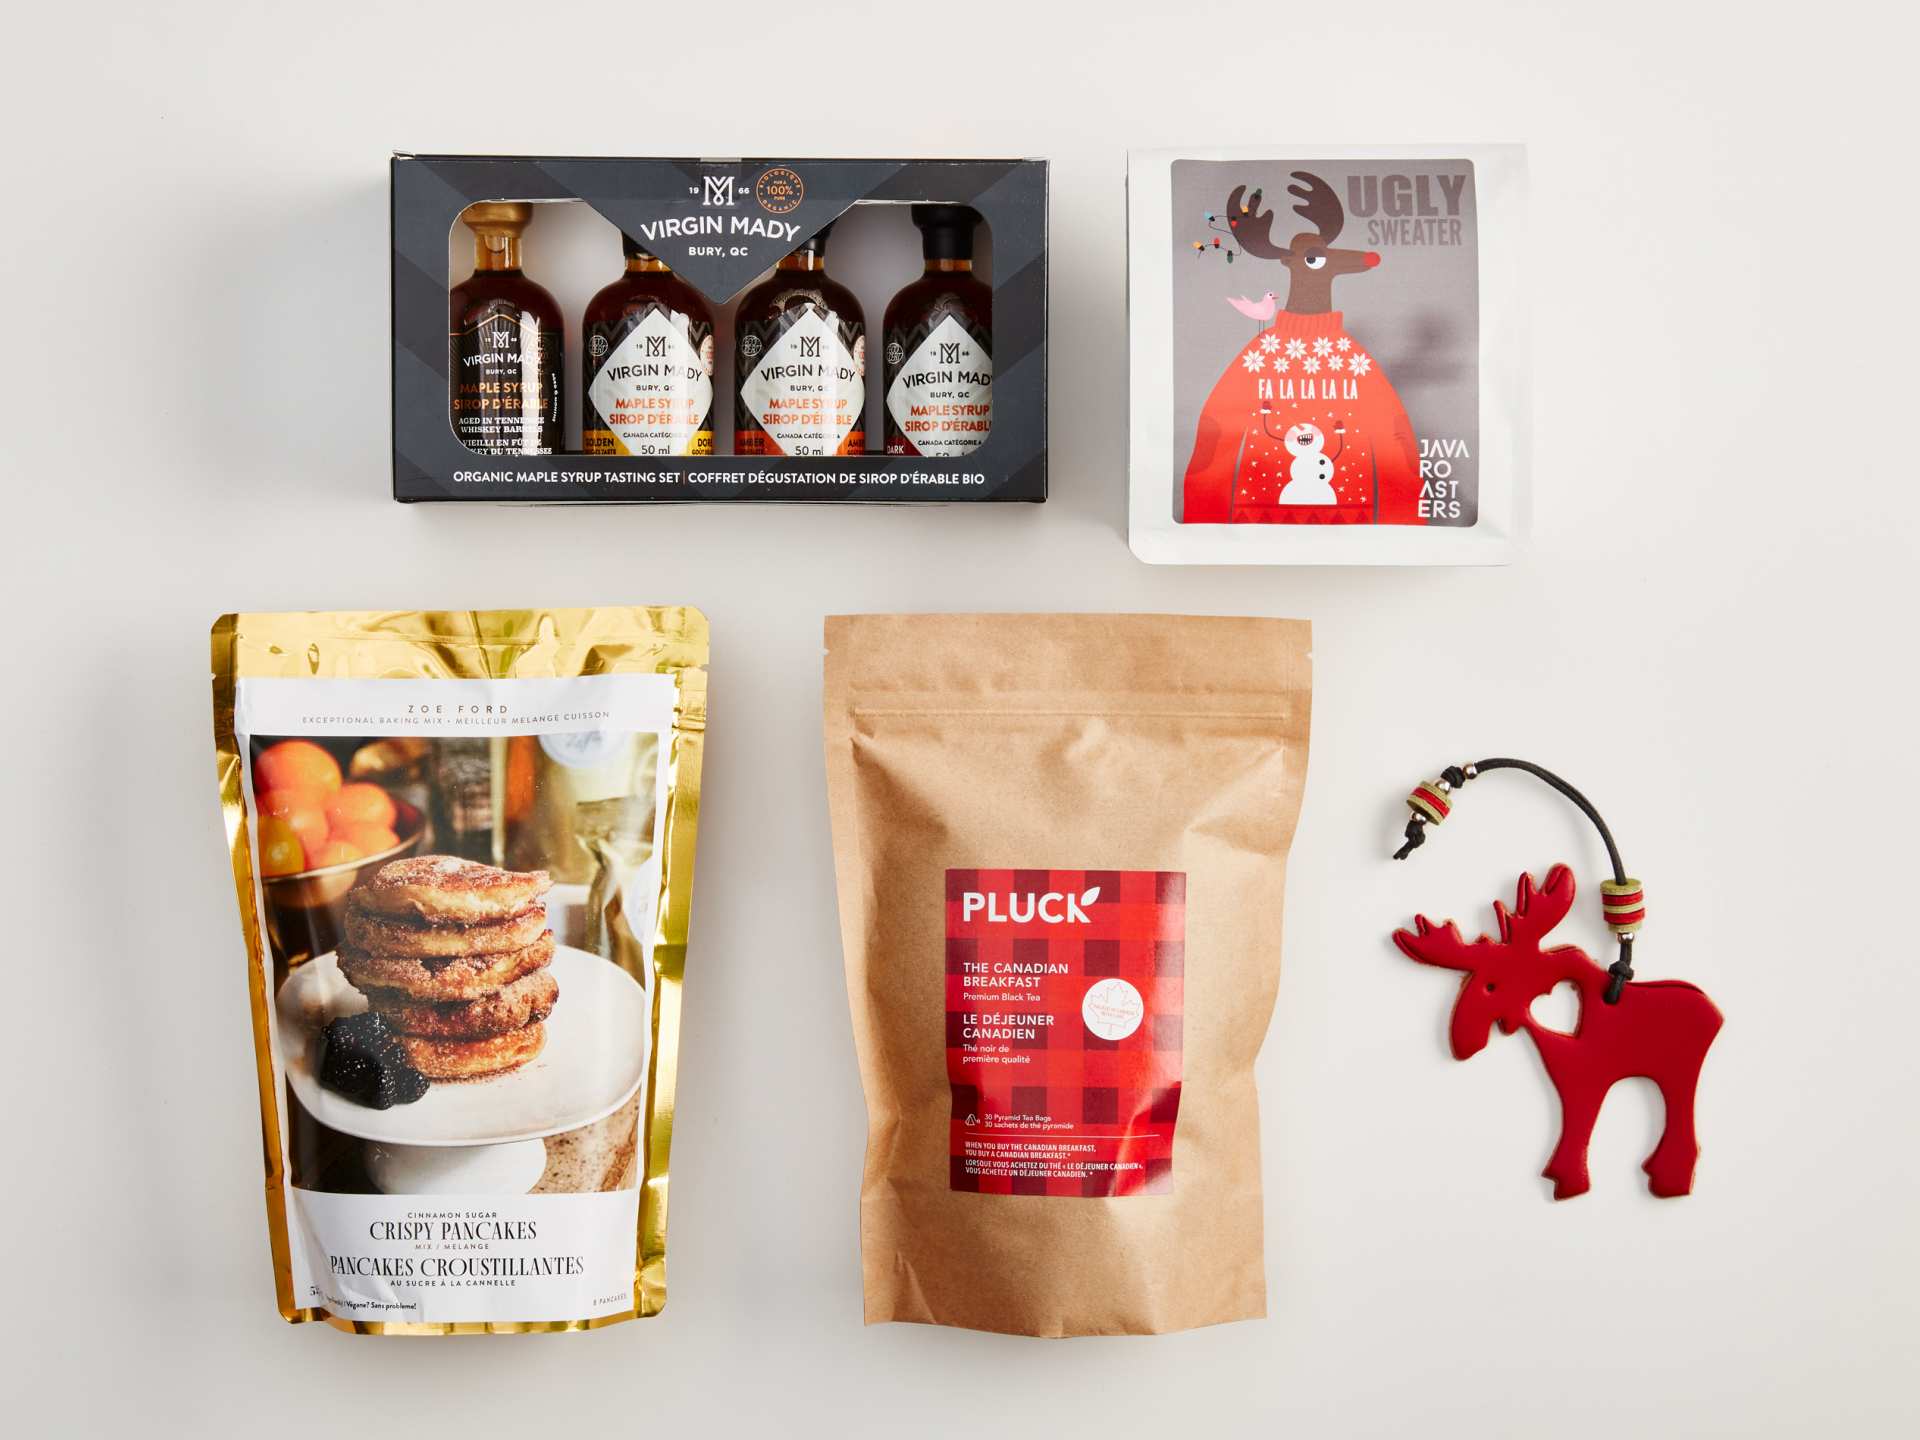 Canadian gift boxes | Wonderkind Canadian Breakfast